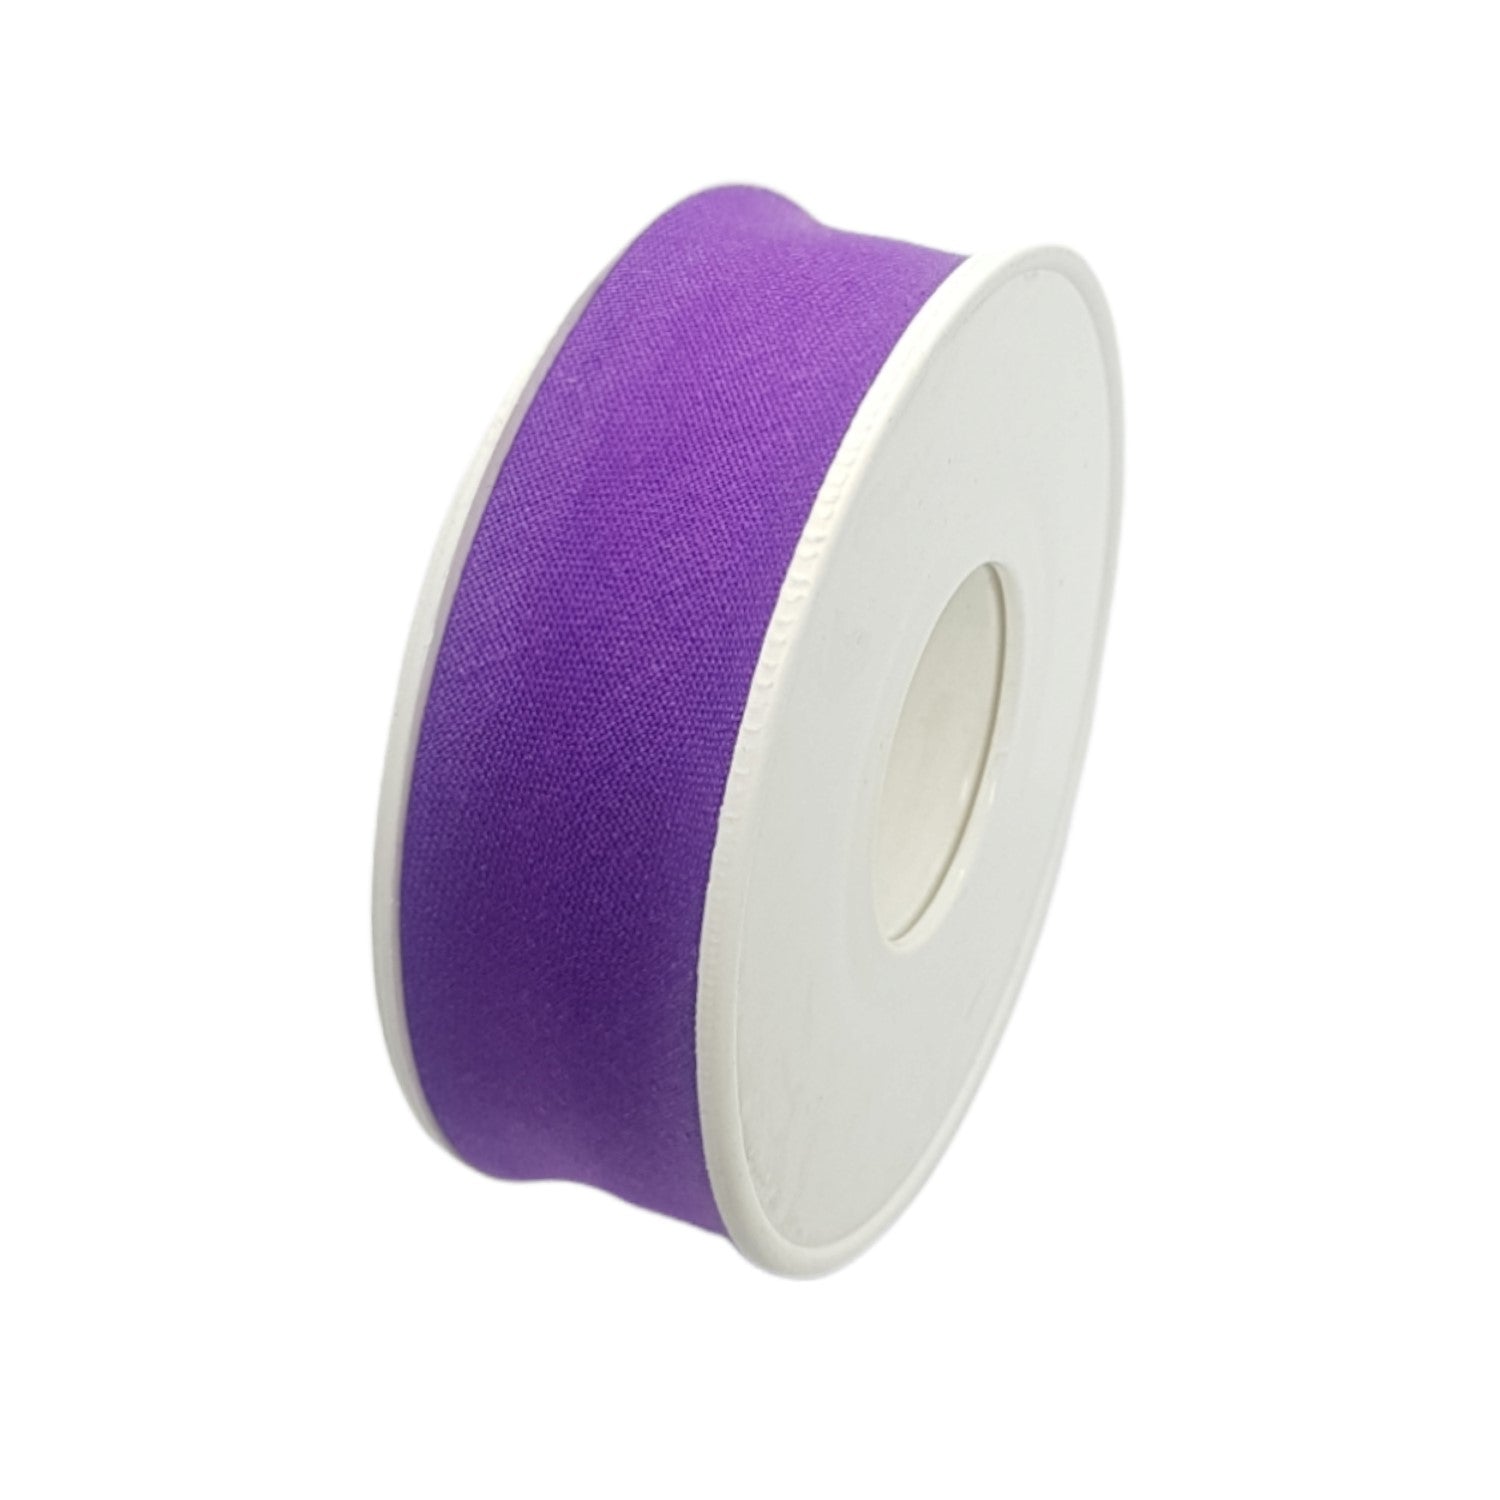 Hobby Trendy 100% Cotton Bias Binding Tape (Single Fold) 20mm-13/16inch  (5meters- 5.46yards) for Sewing, Seaming, Binding, Hemming, Piping, Quilting